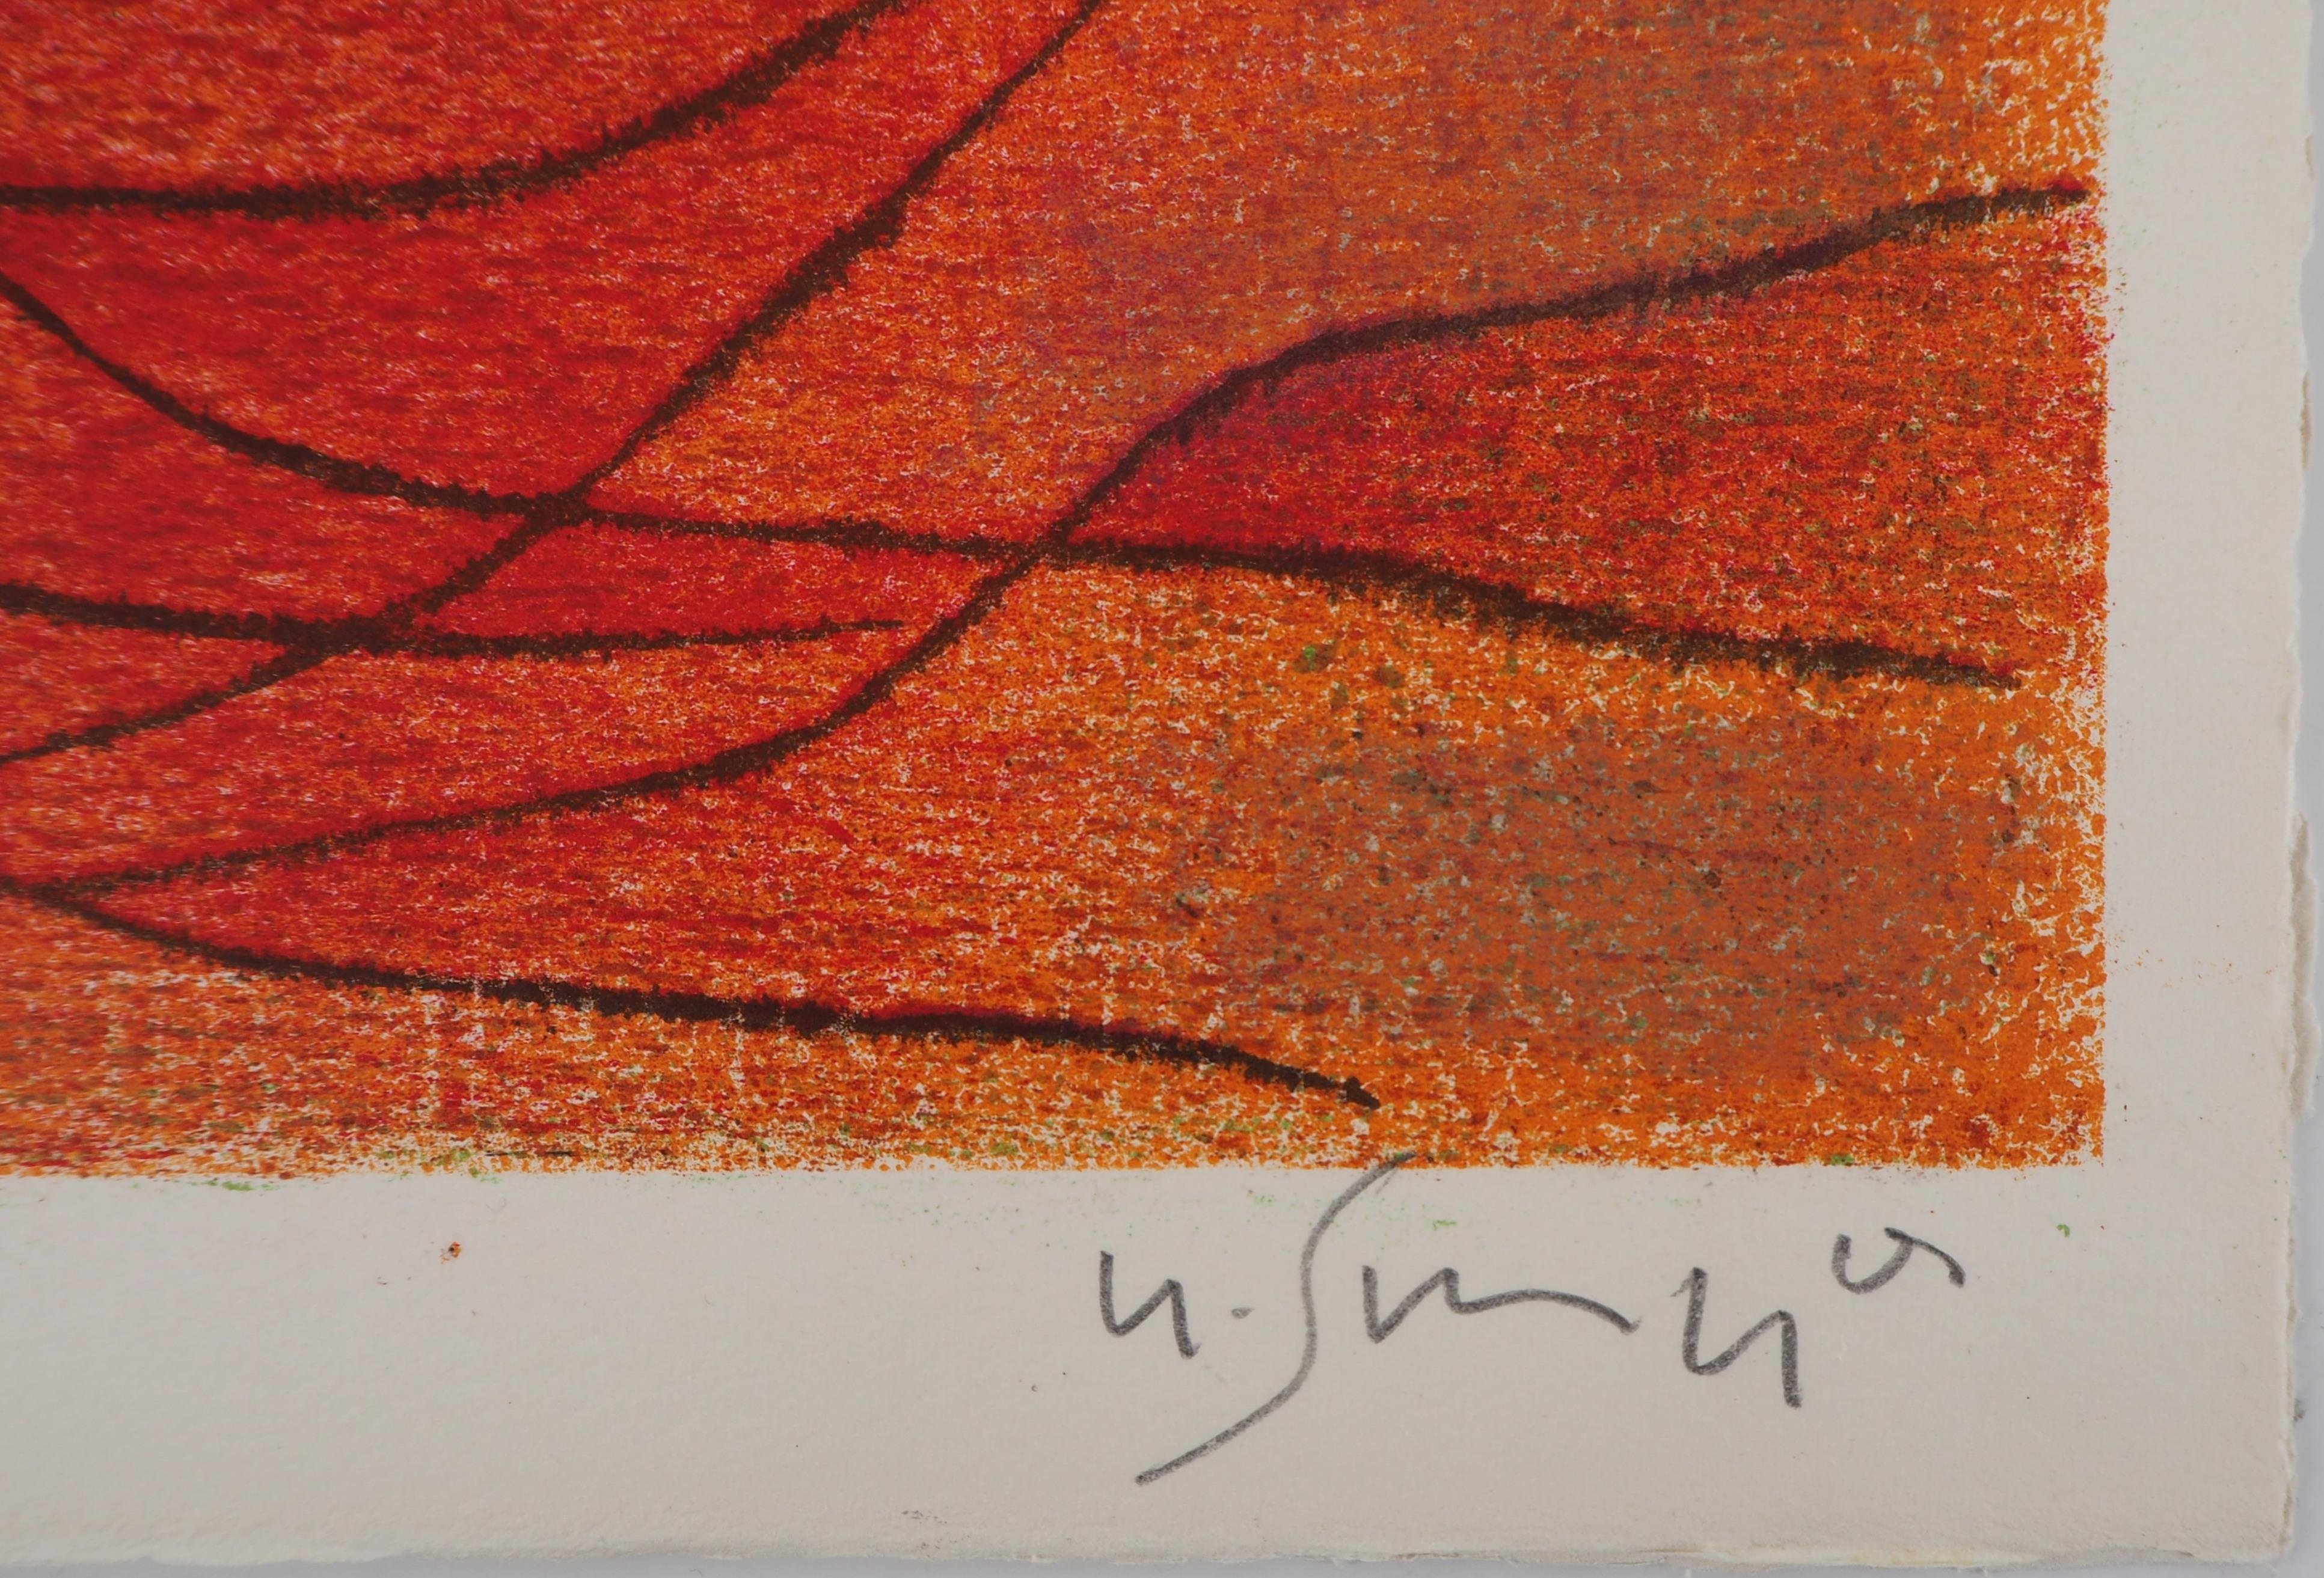 Abstract composition in Orange - Original lithograph, Handsigned - Print by Gustave Singier